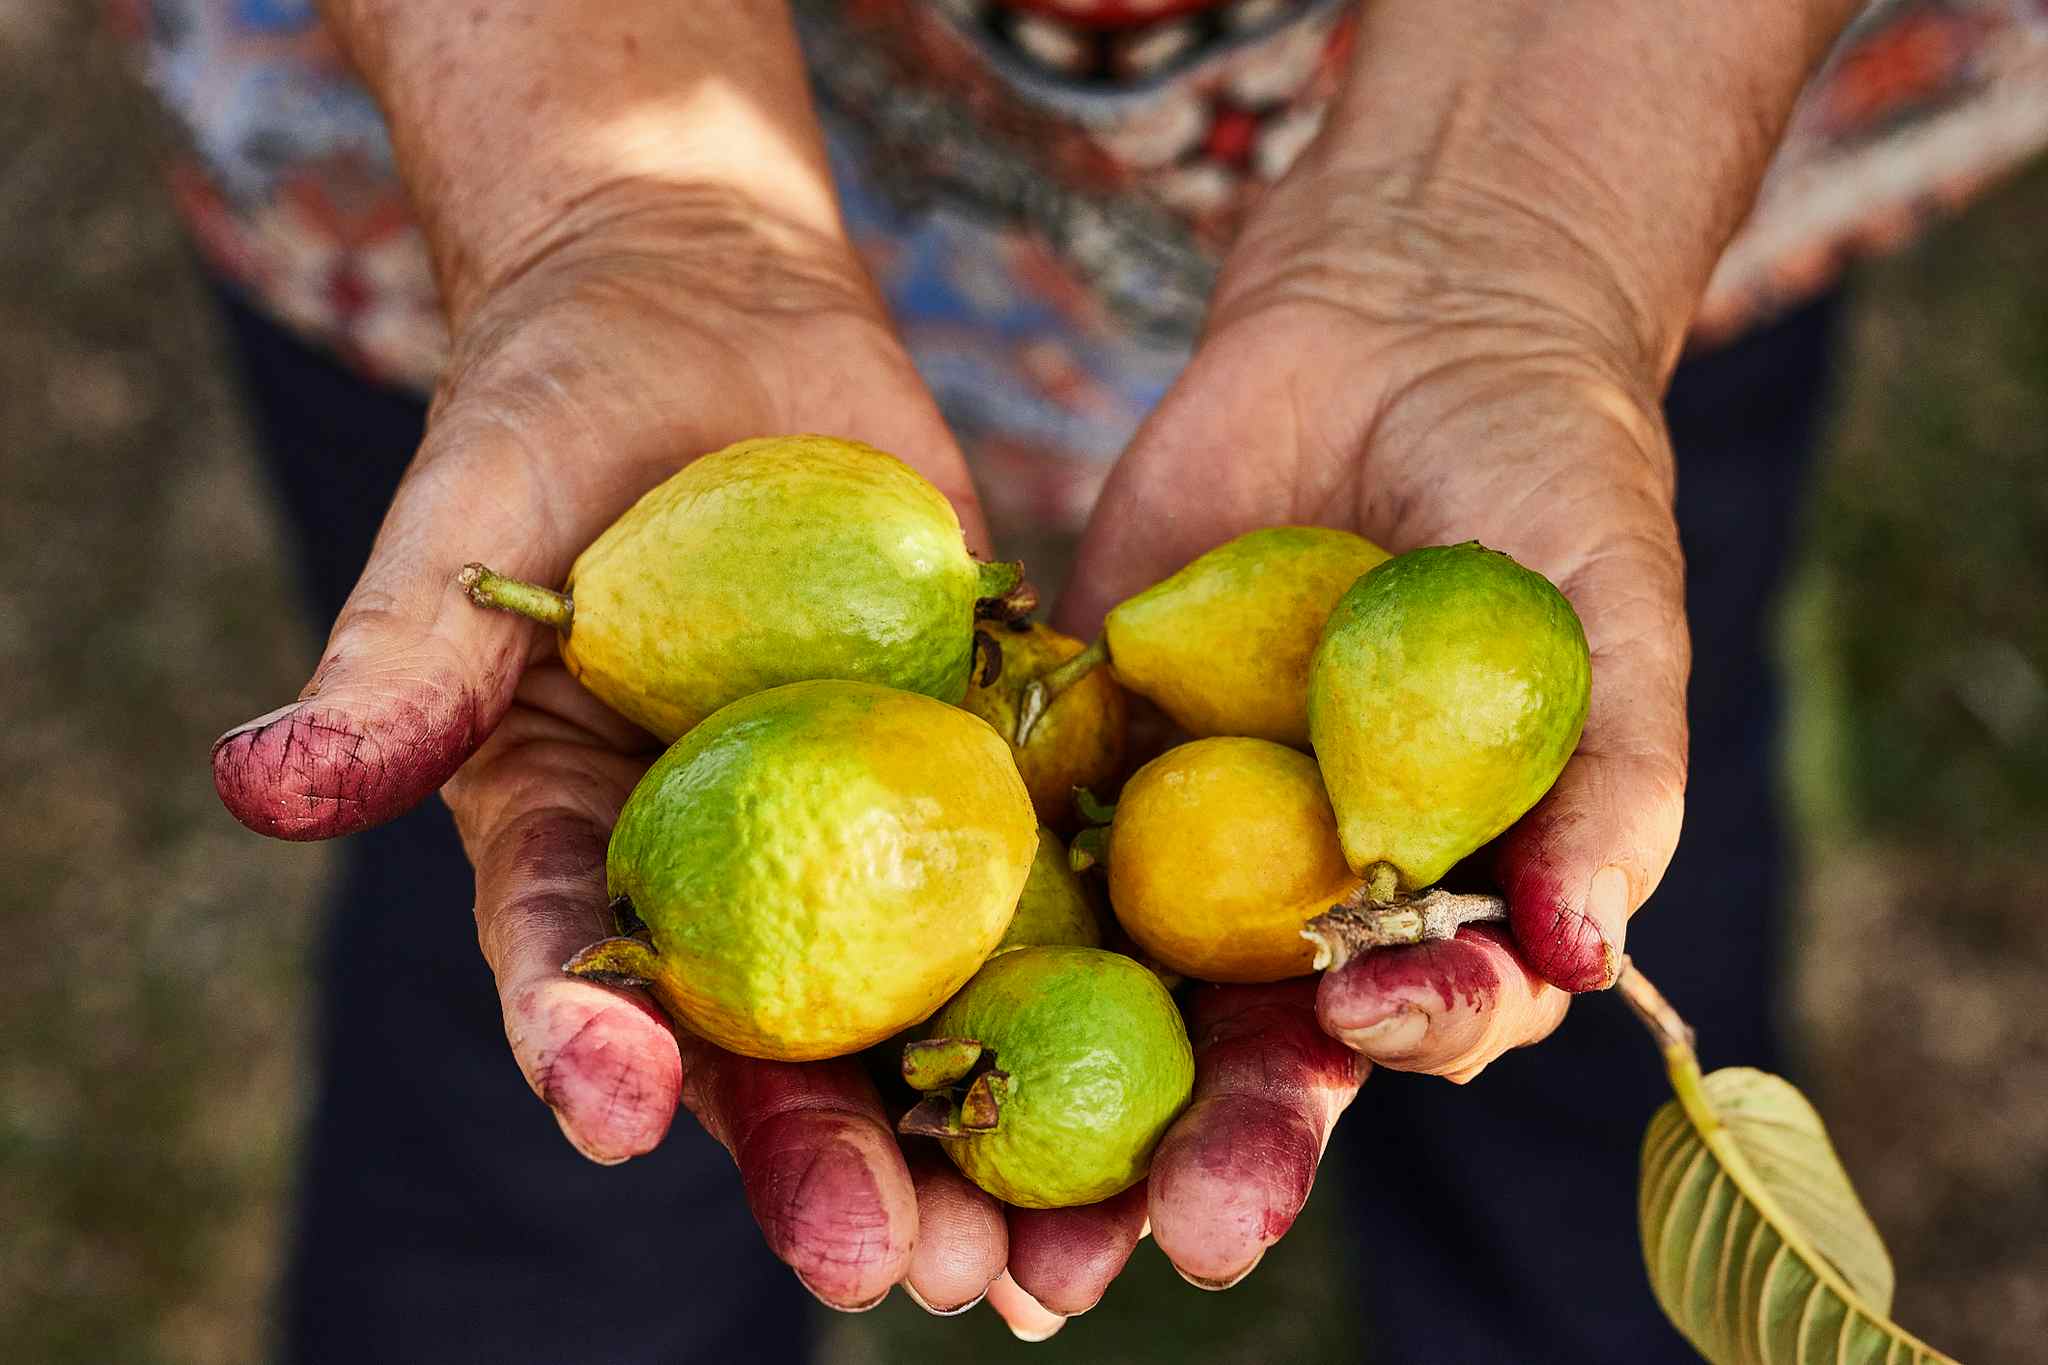 Farmer holding fruits in their hands, Costa Rica